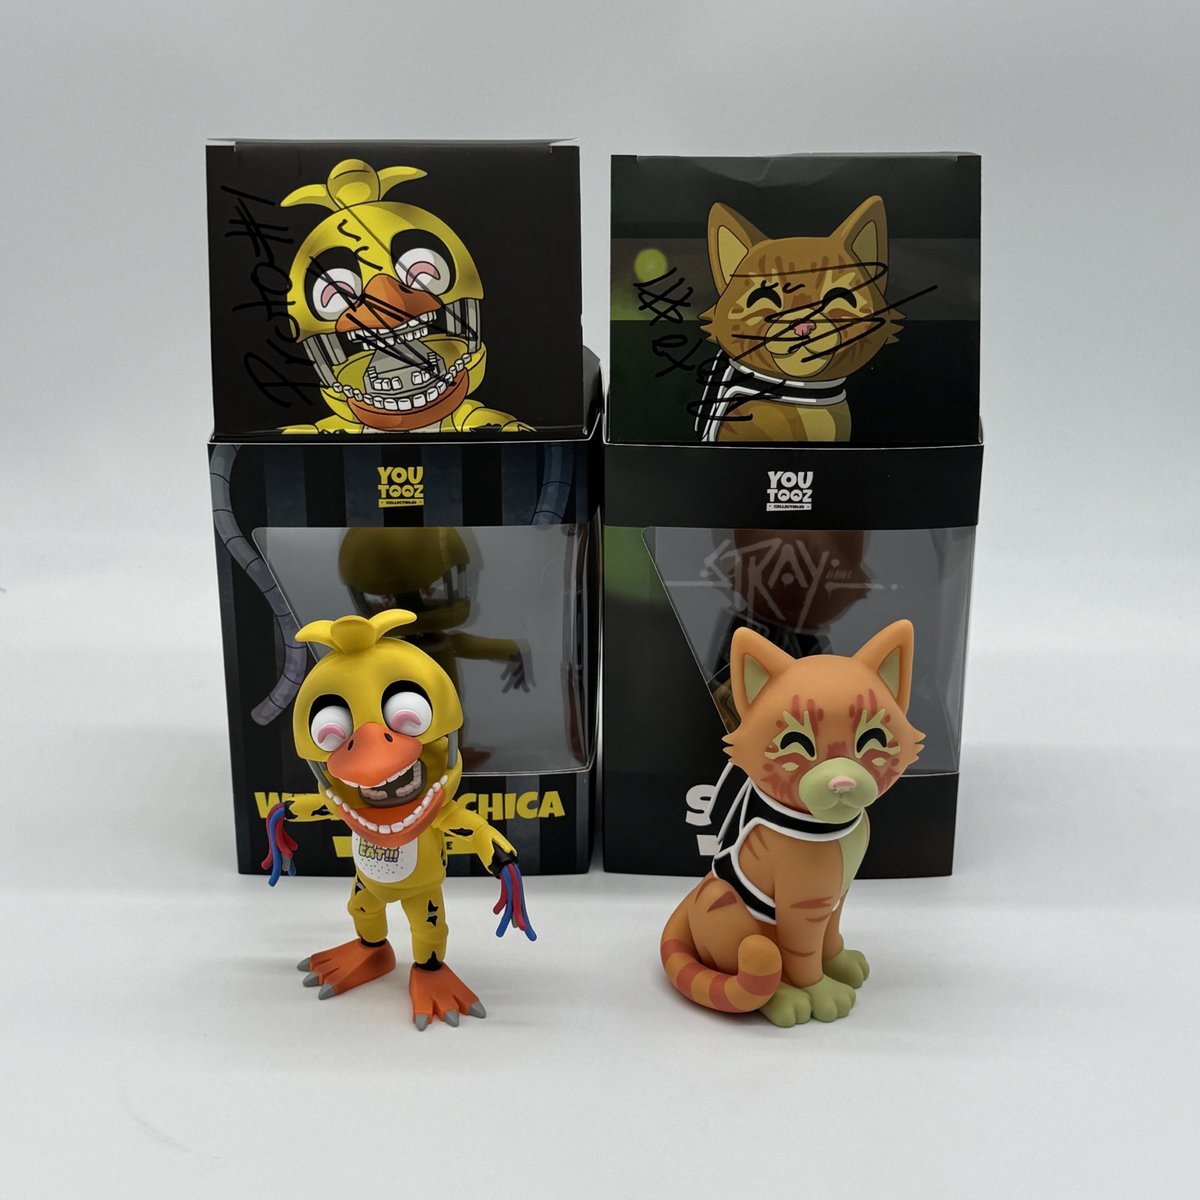 🚨 SPECIAL #TOOZDAY PROTOTYPE GIVEAWAY 🚨 to win a signed proto of withered chica and stray, retweet, like & reply with #TOOZDAY and ur fav youtooz 😎 1 epic winner announced april 23rd!